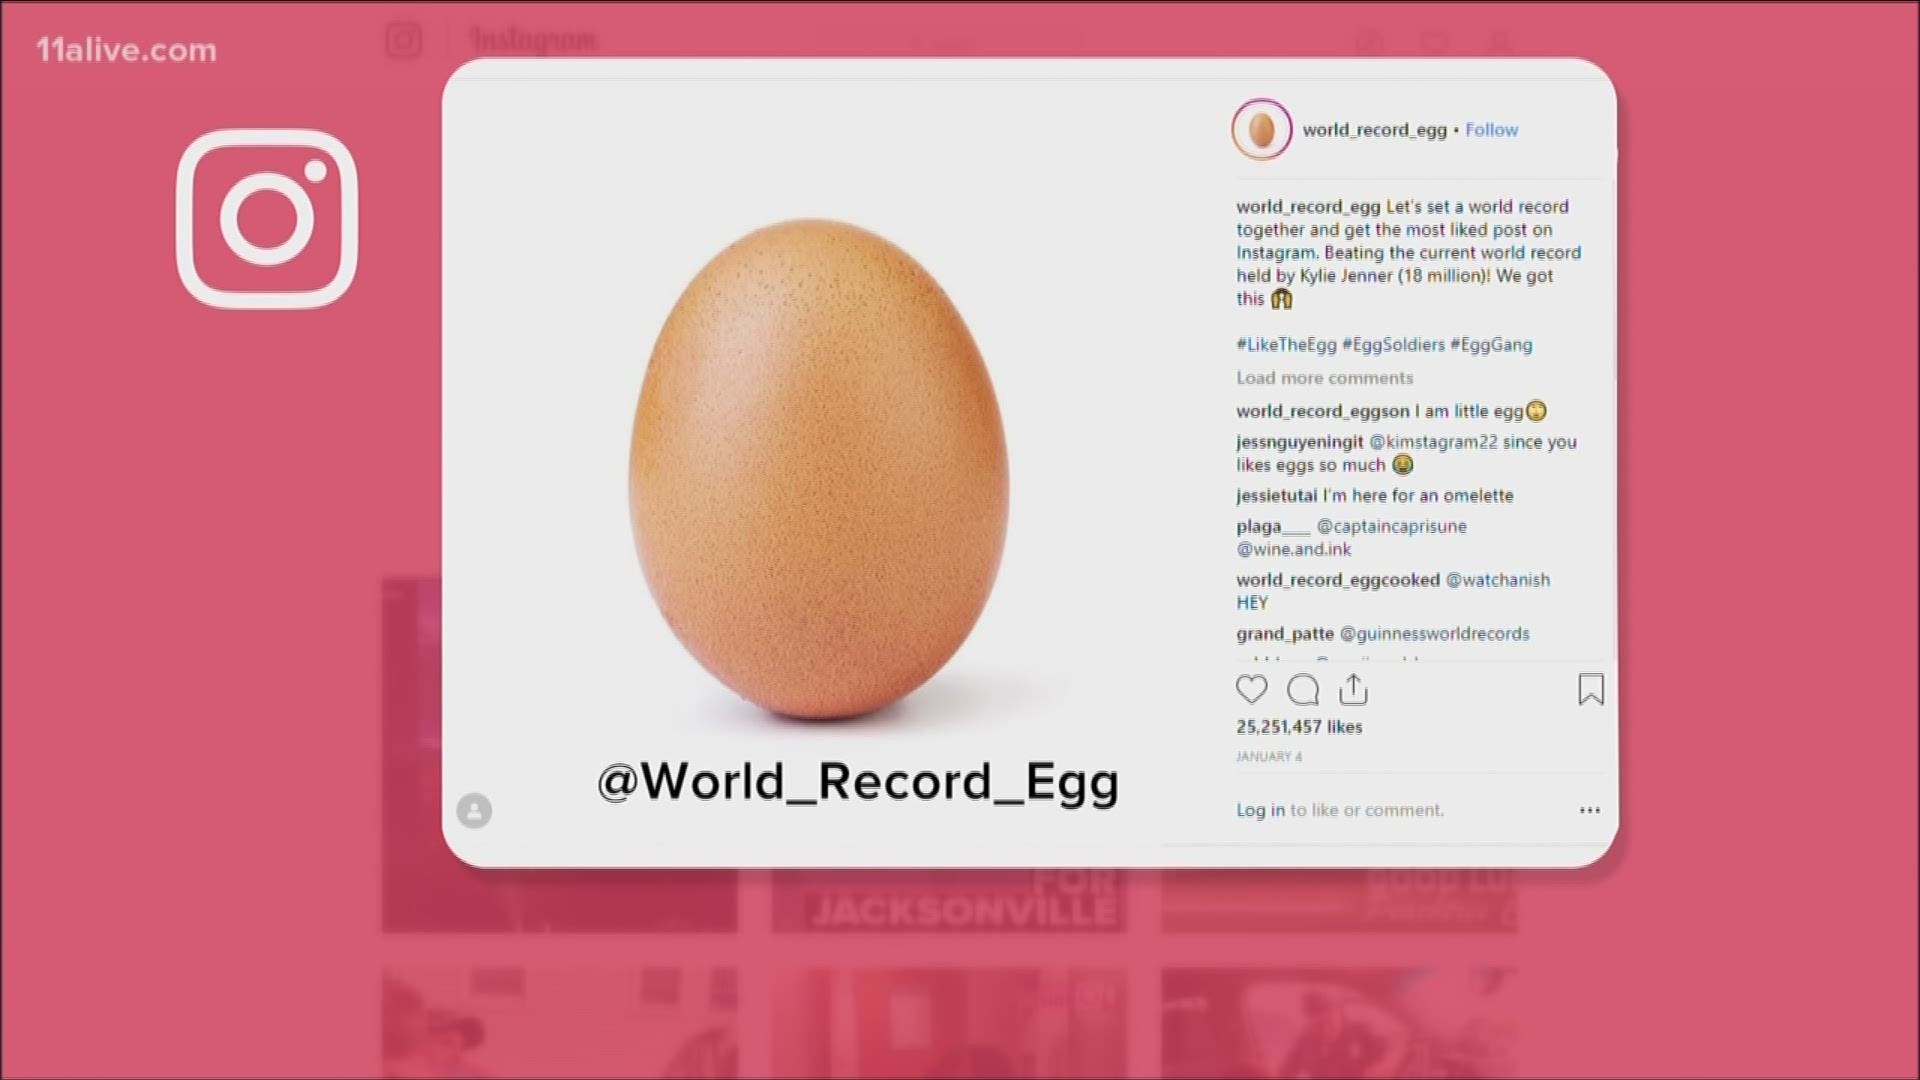 The egg surpassed Kylie Jenner's post Sunday night and is sitting at around 25 million likes.